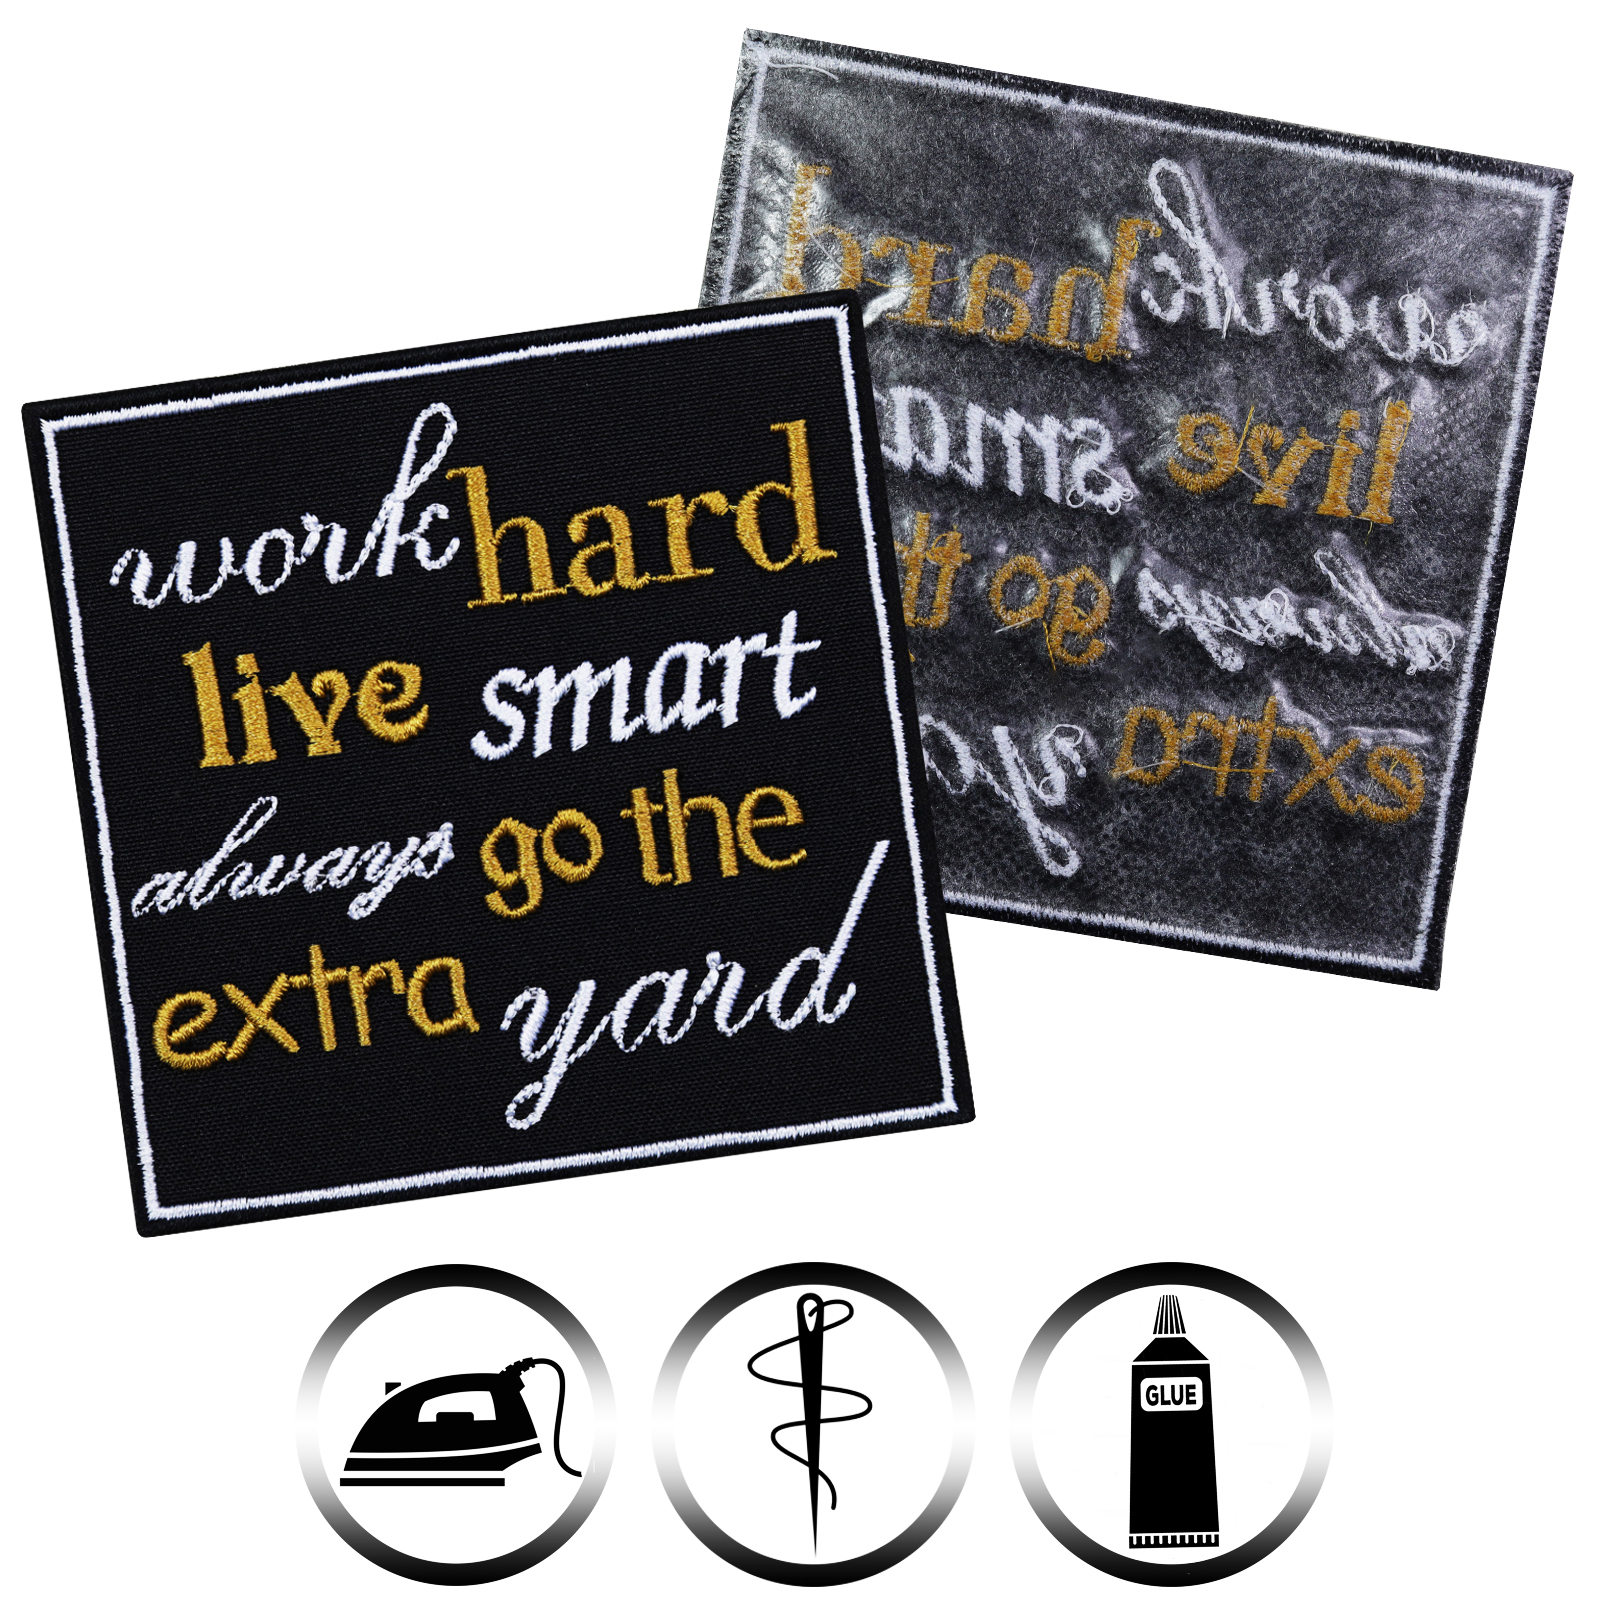 Work hard - live smart - akways go to the extra yard - Patch